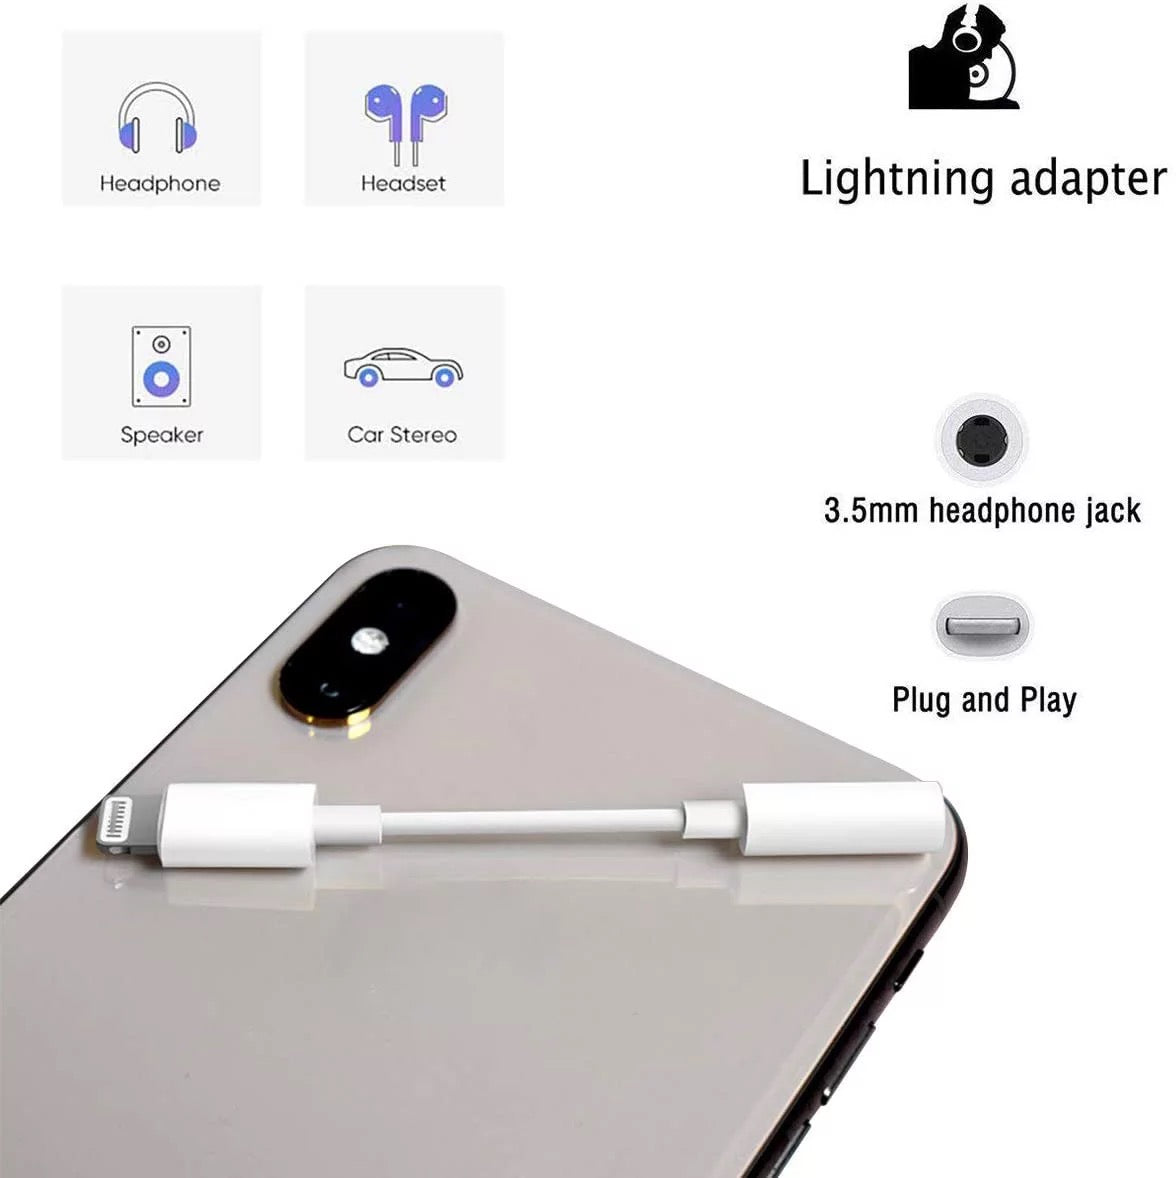 Lightning to 3.5mm (1/8") Headphone Adapter Audio Aux Cable for iPhone/iPad